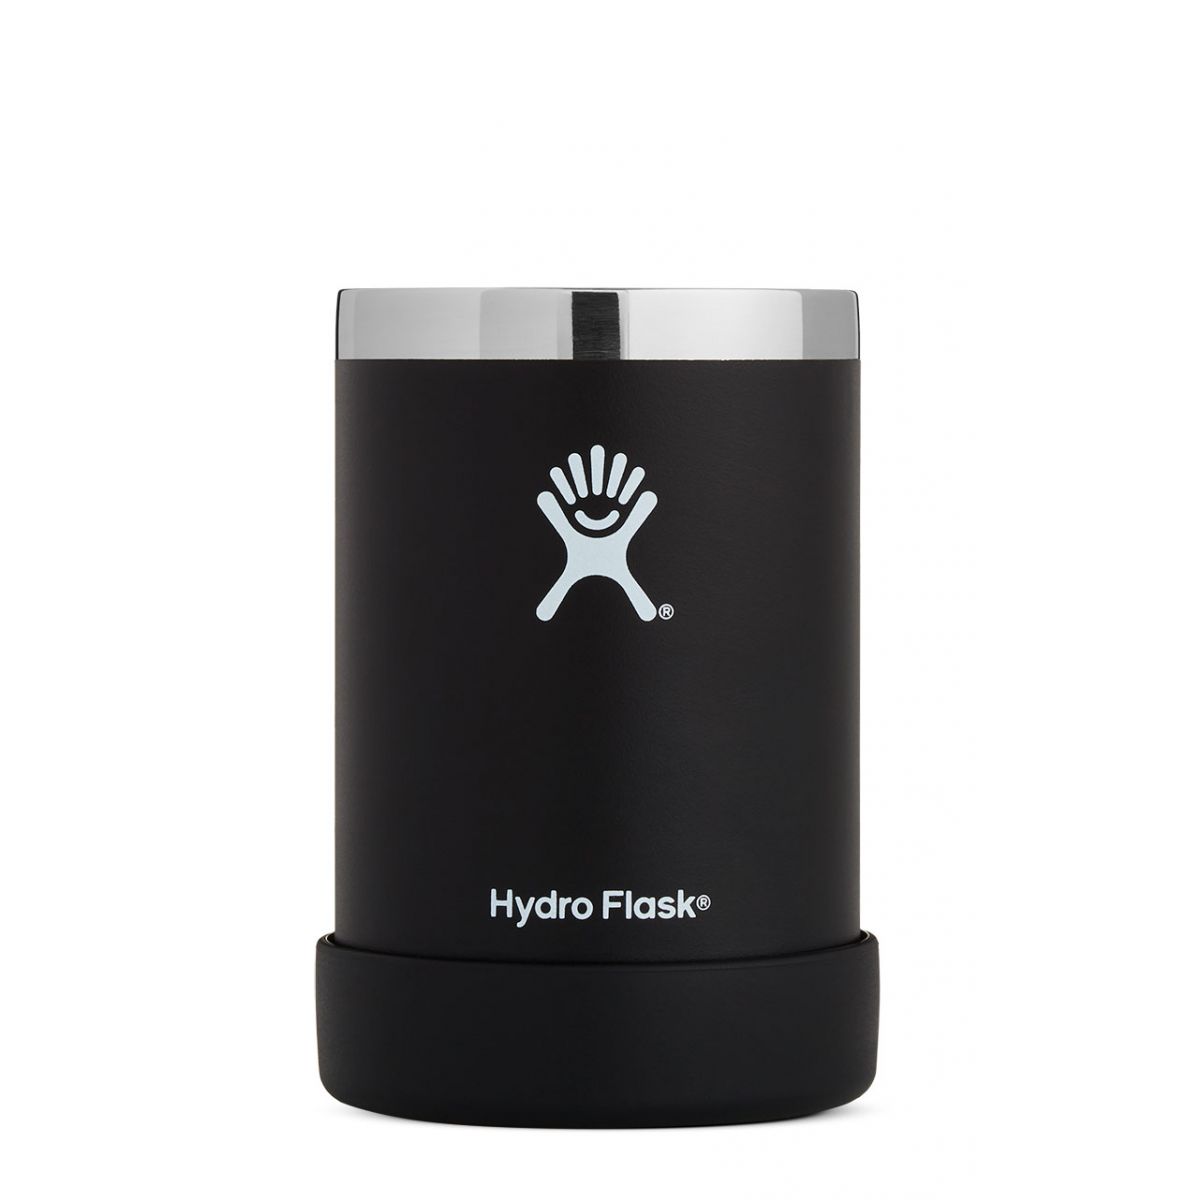 Hydro Flask Cooler Cup 12oz - Black